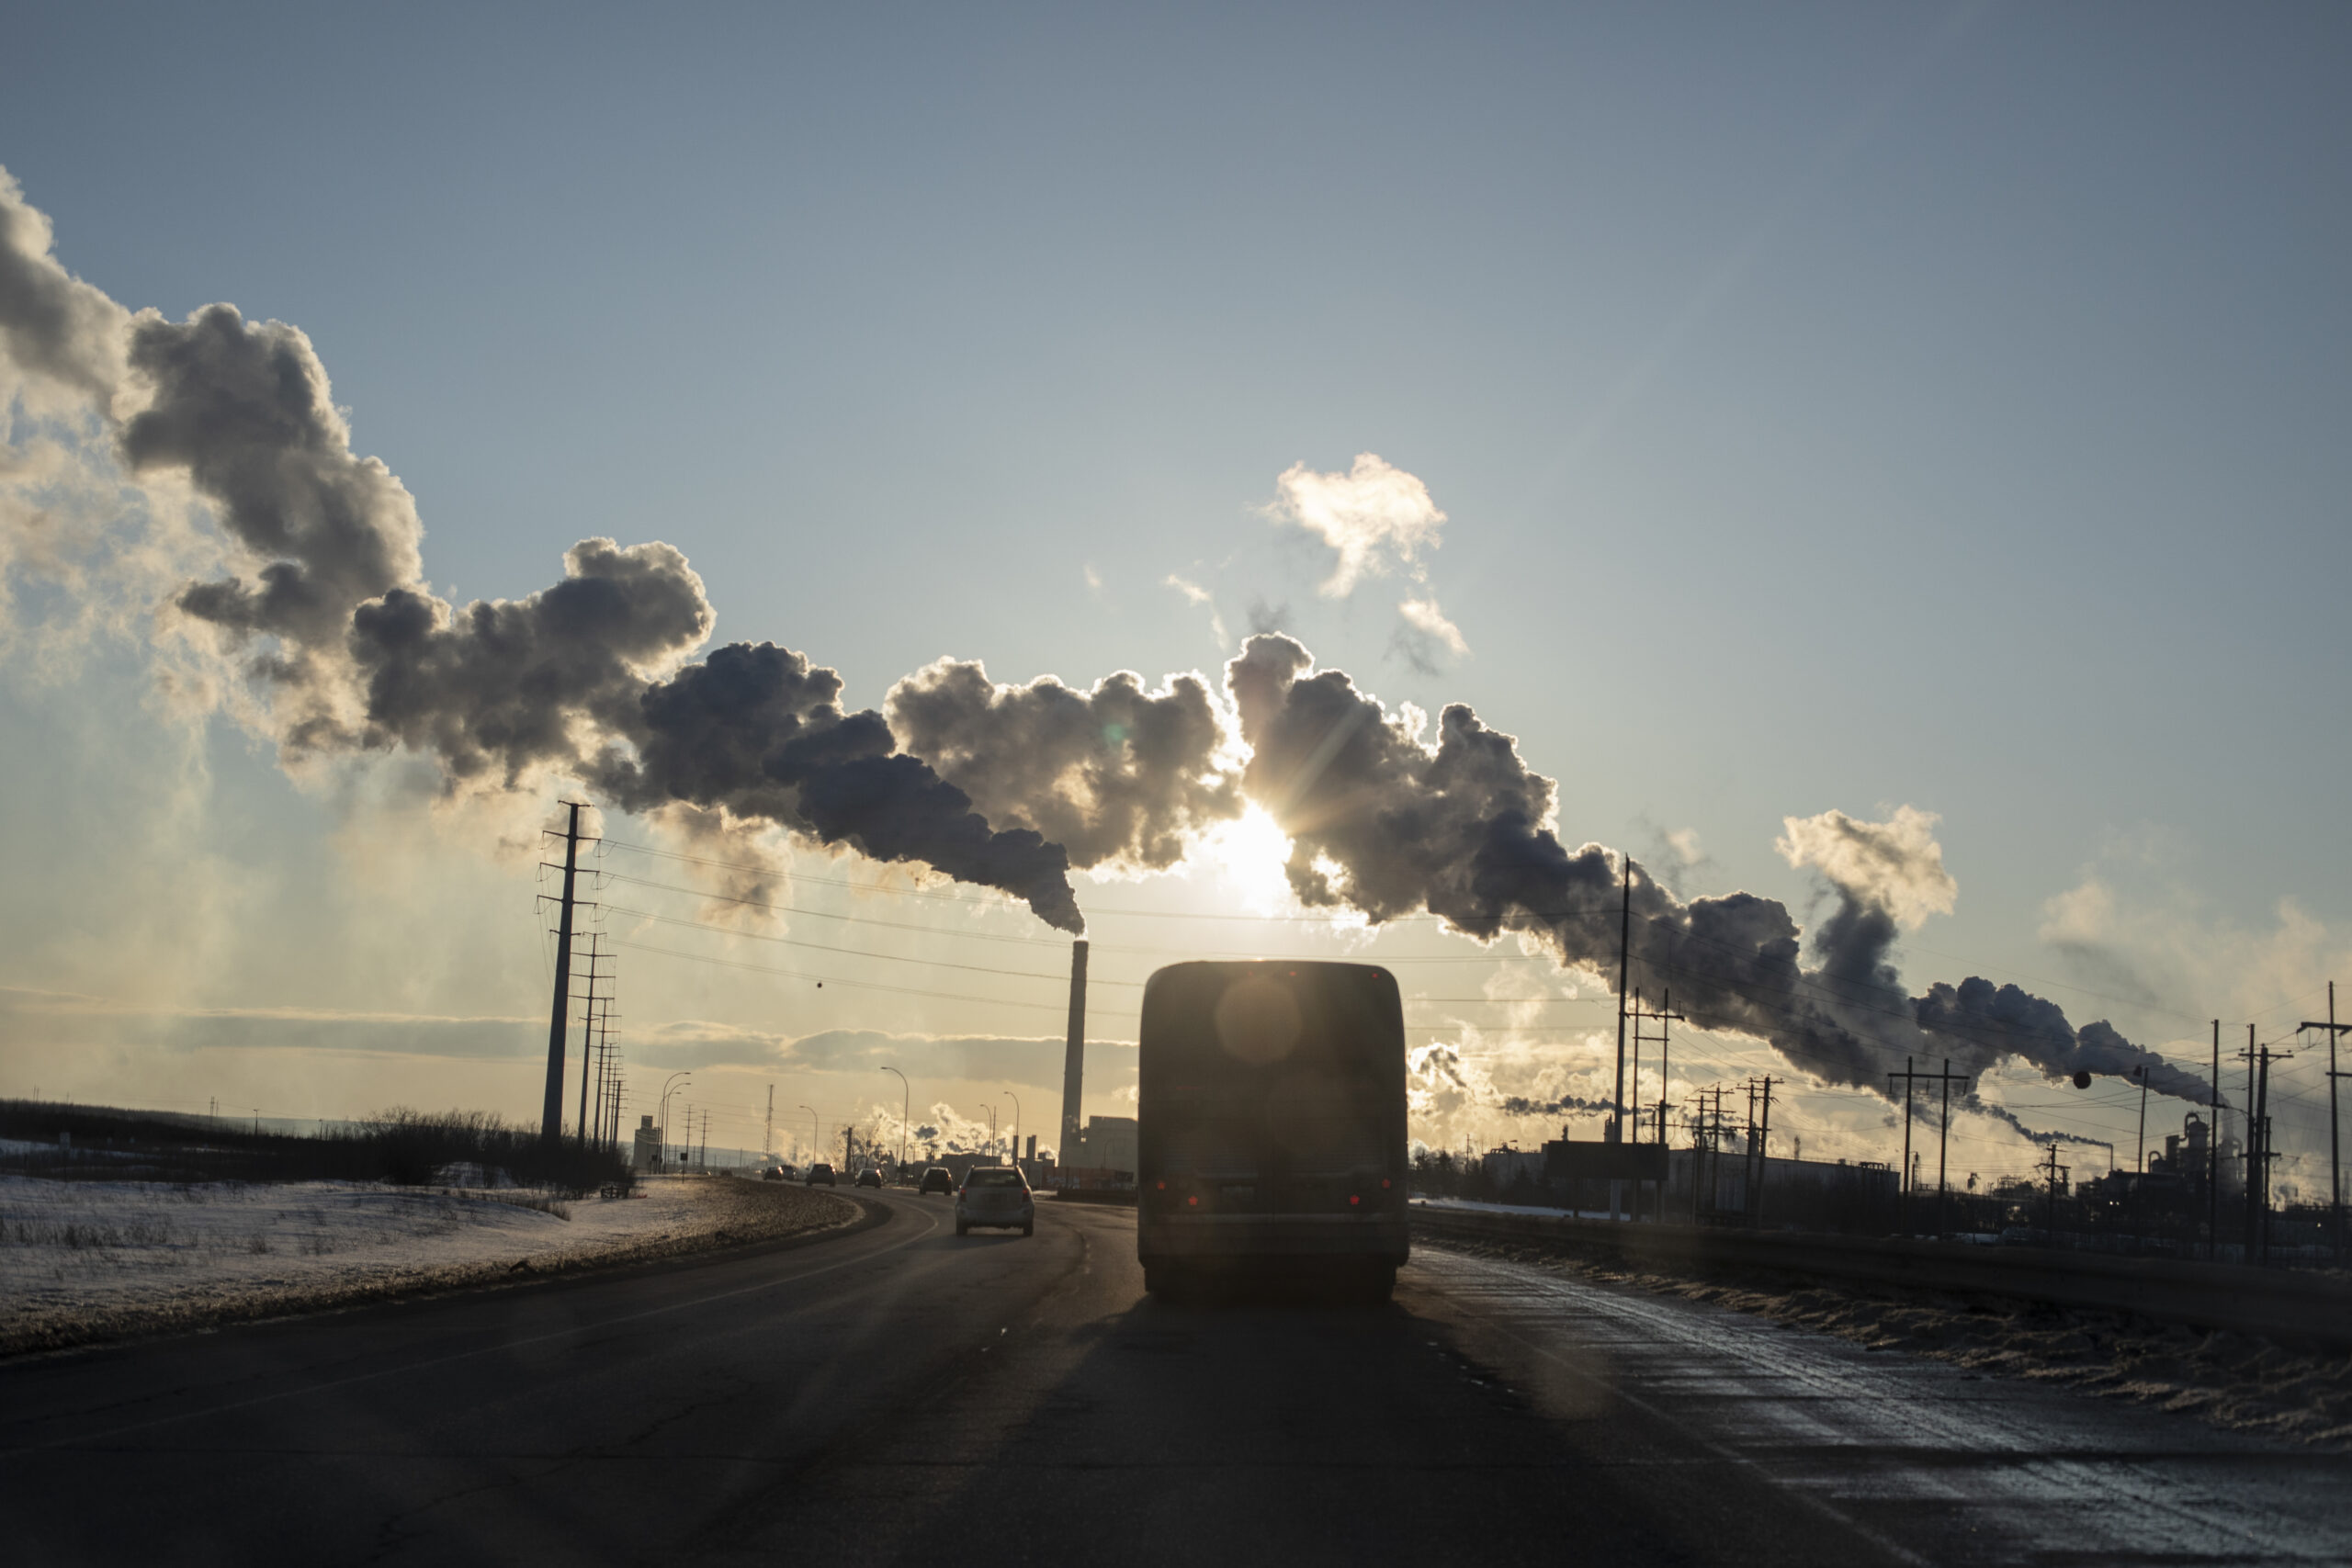 A bus drives down the road with industrial facilities in the background emitting smoke or vapour.